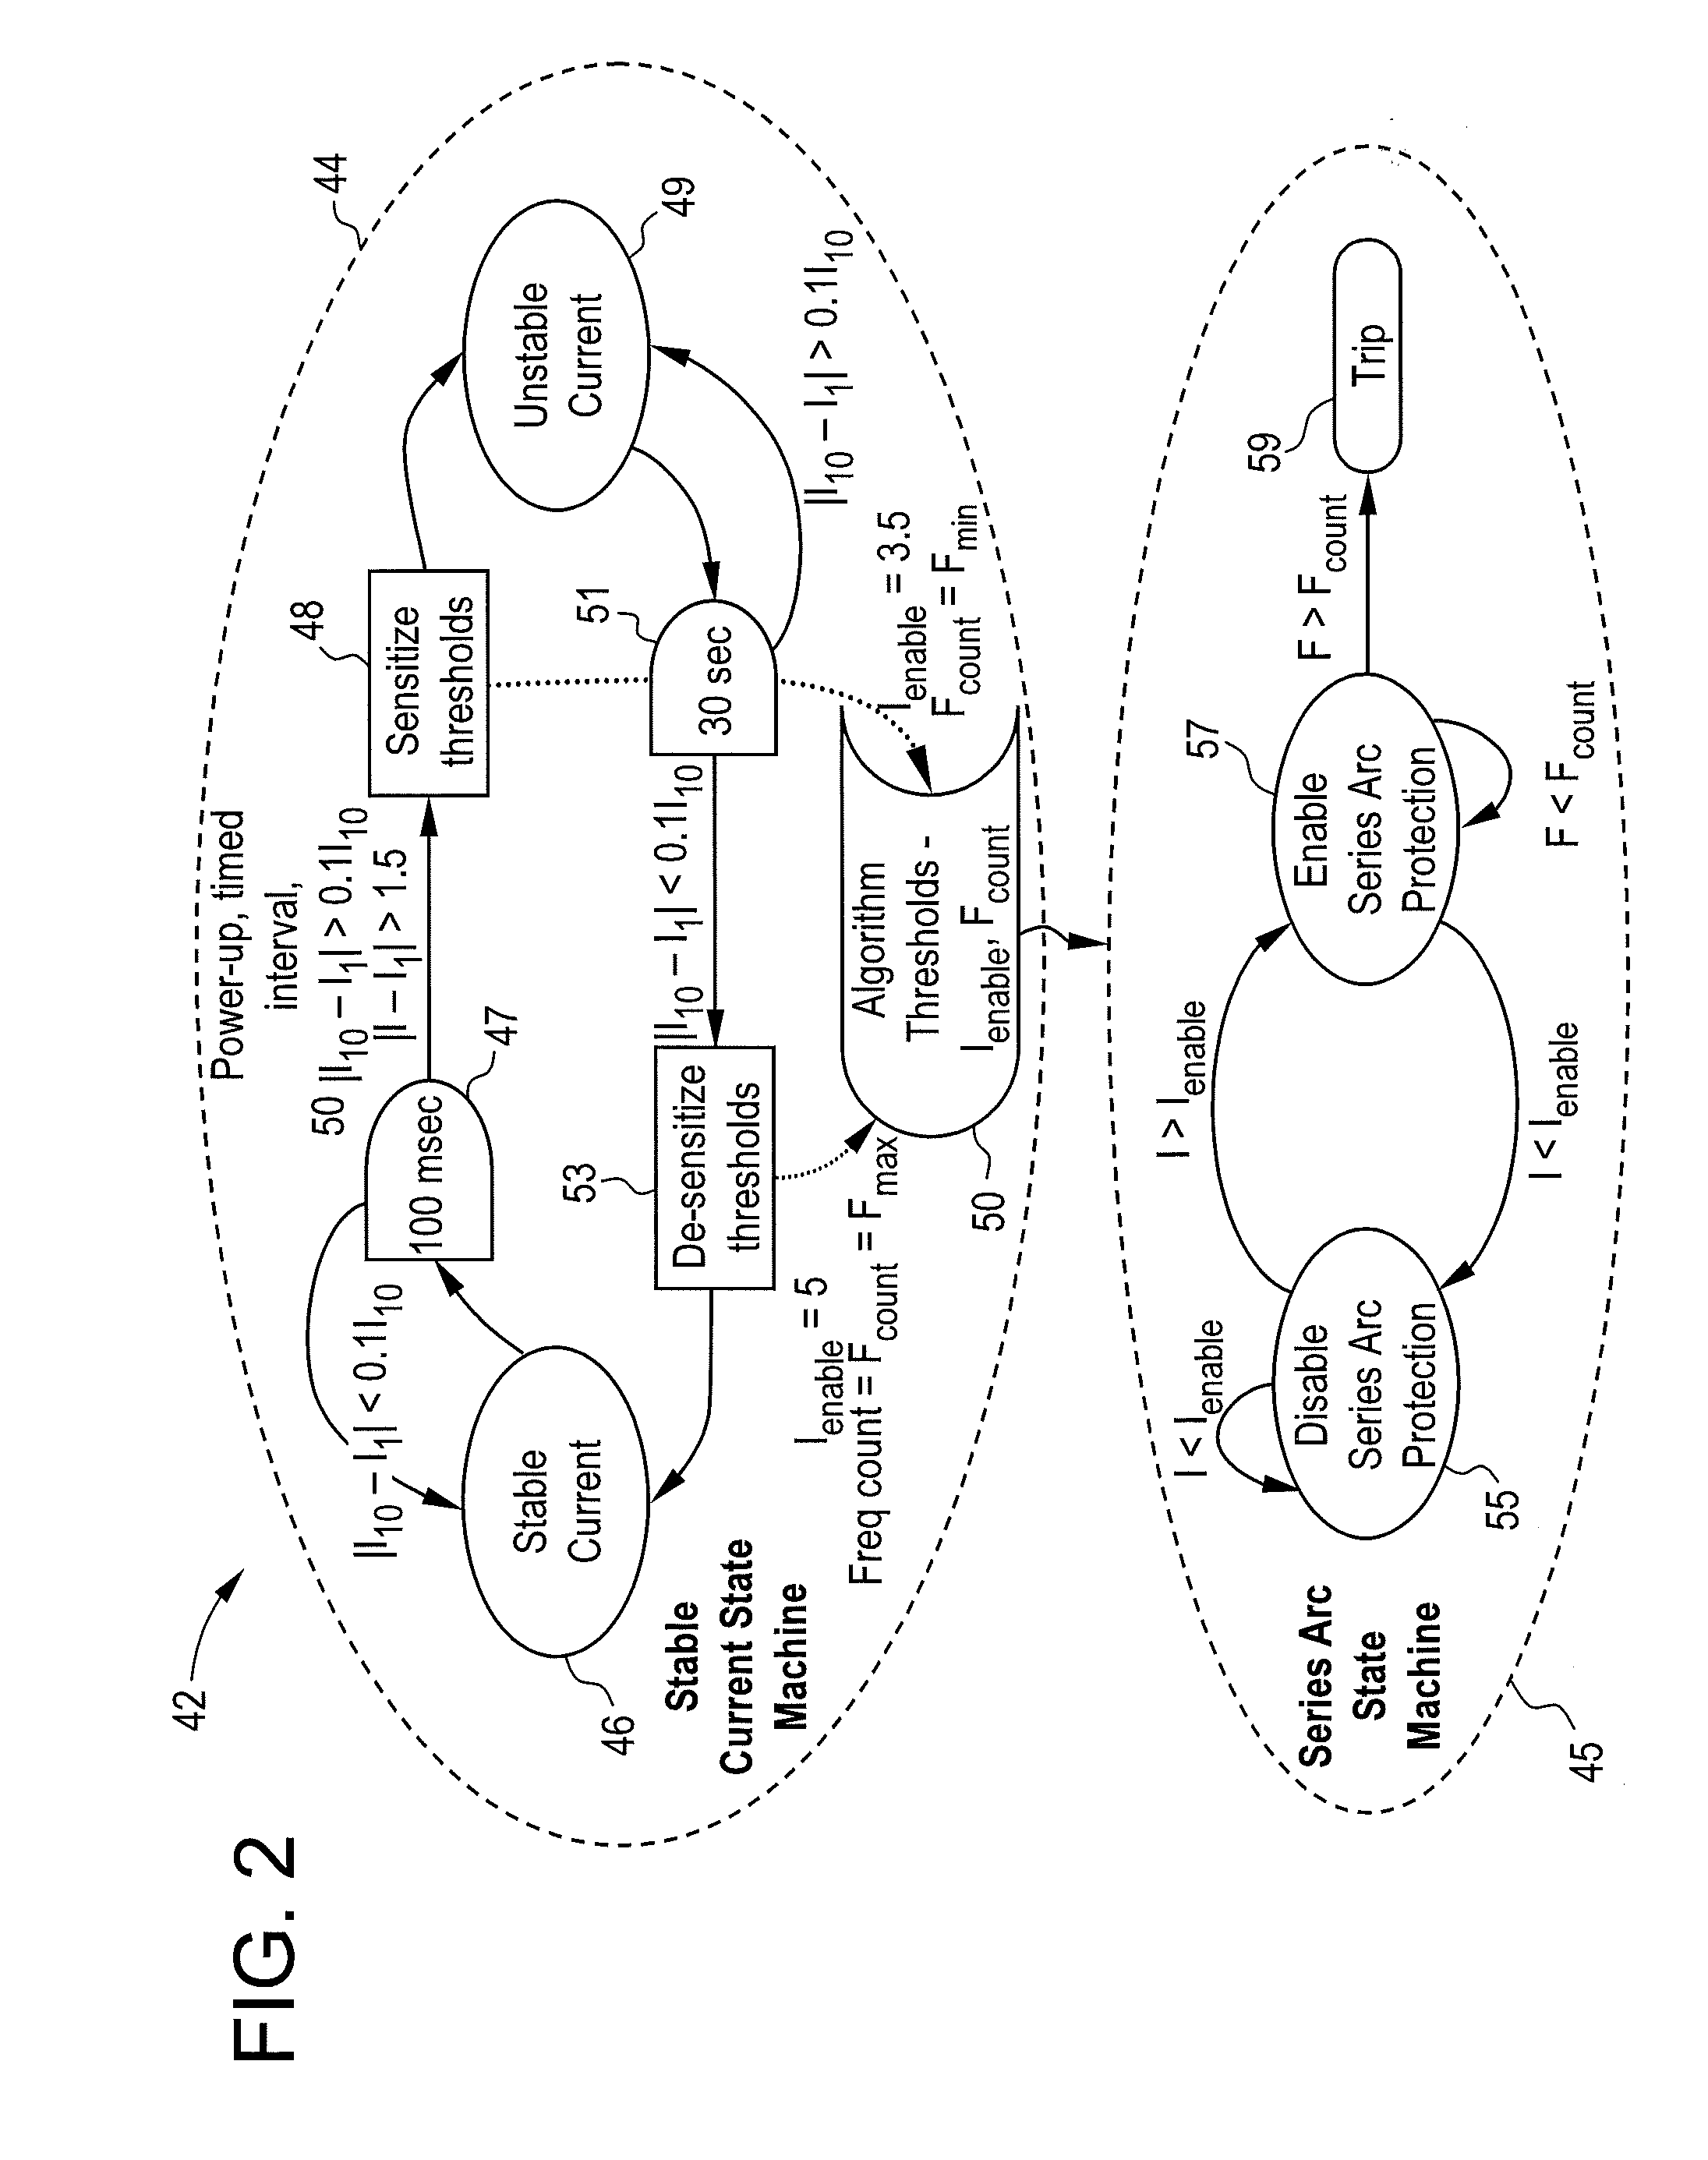 Circuit breaker with arc fault detection and method of operation